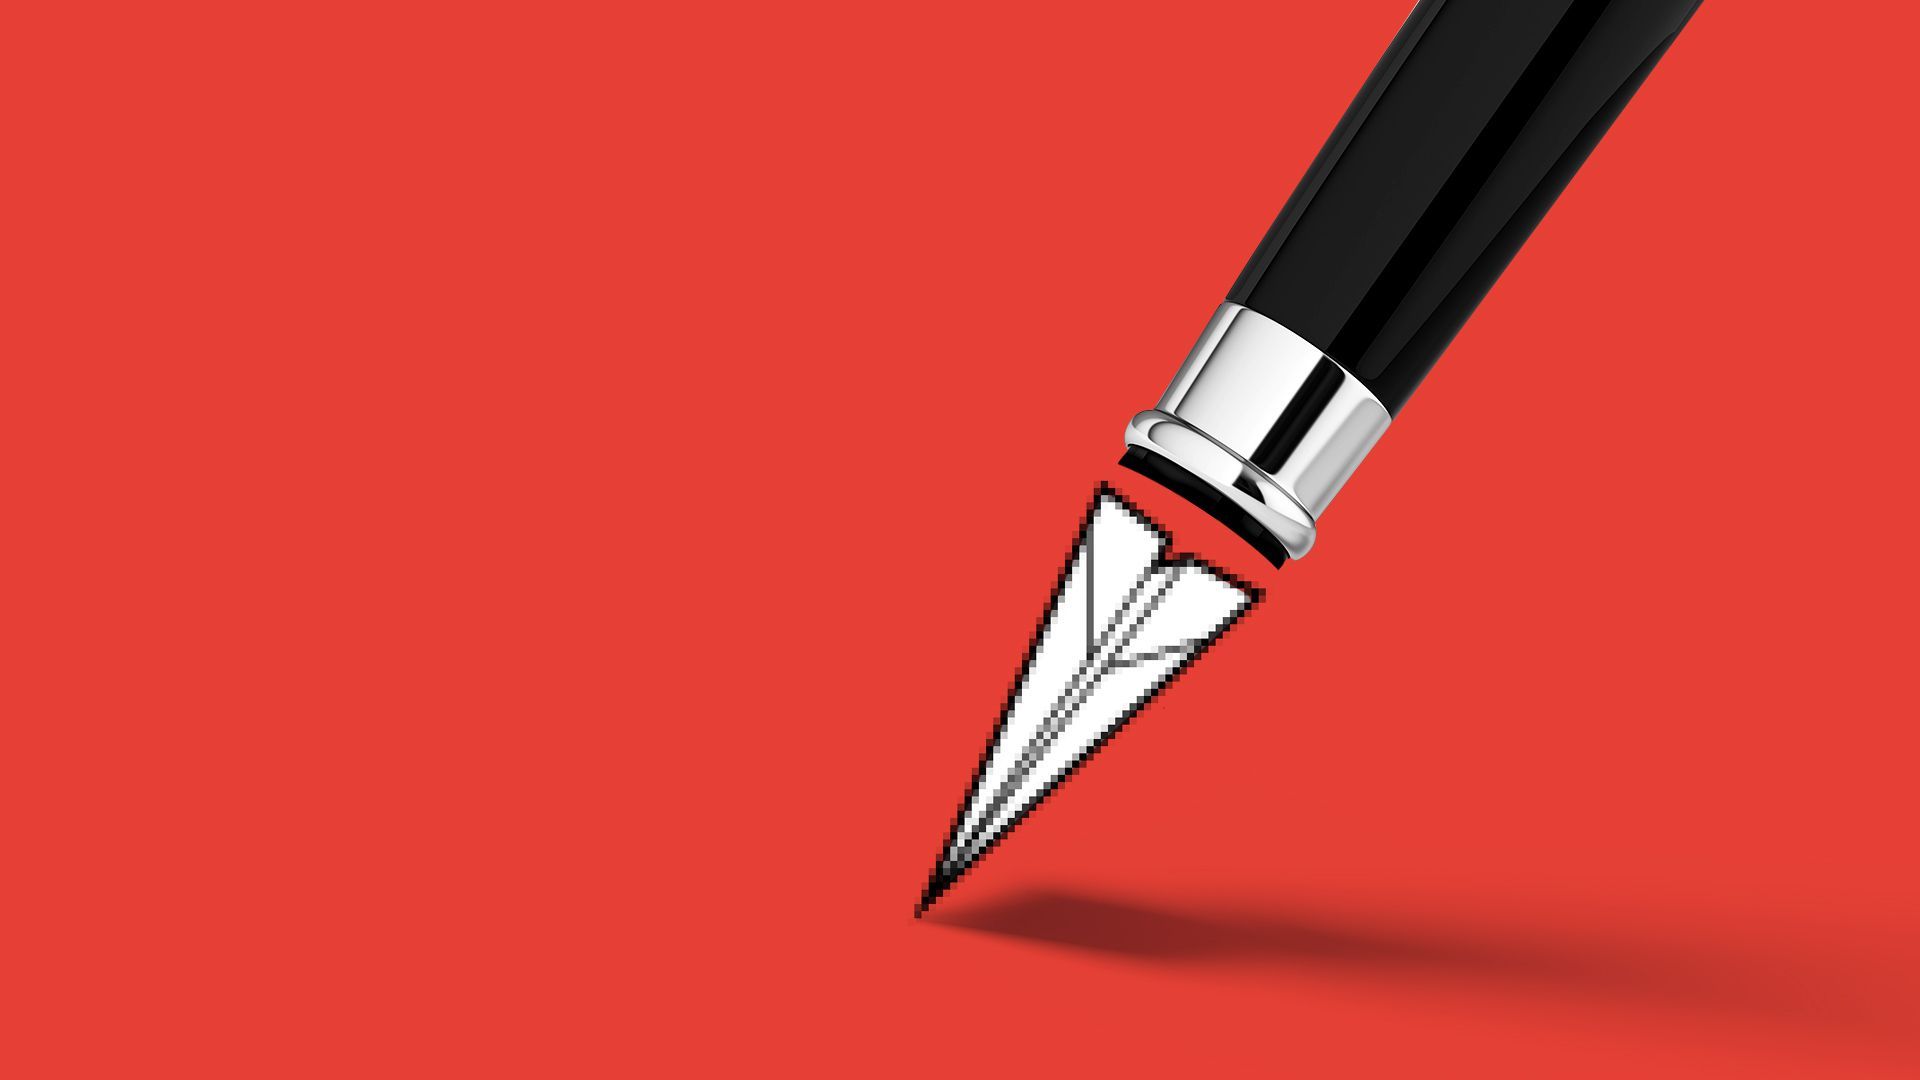 Illustration of a fountain pen with a pixelated paper airplane as the nib. 